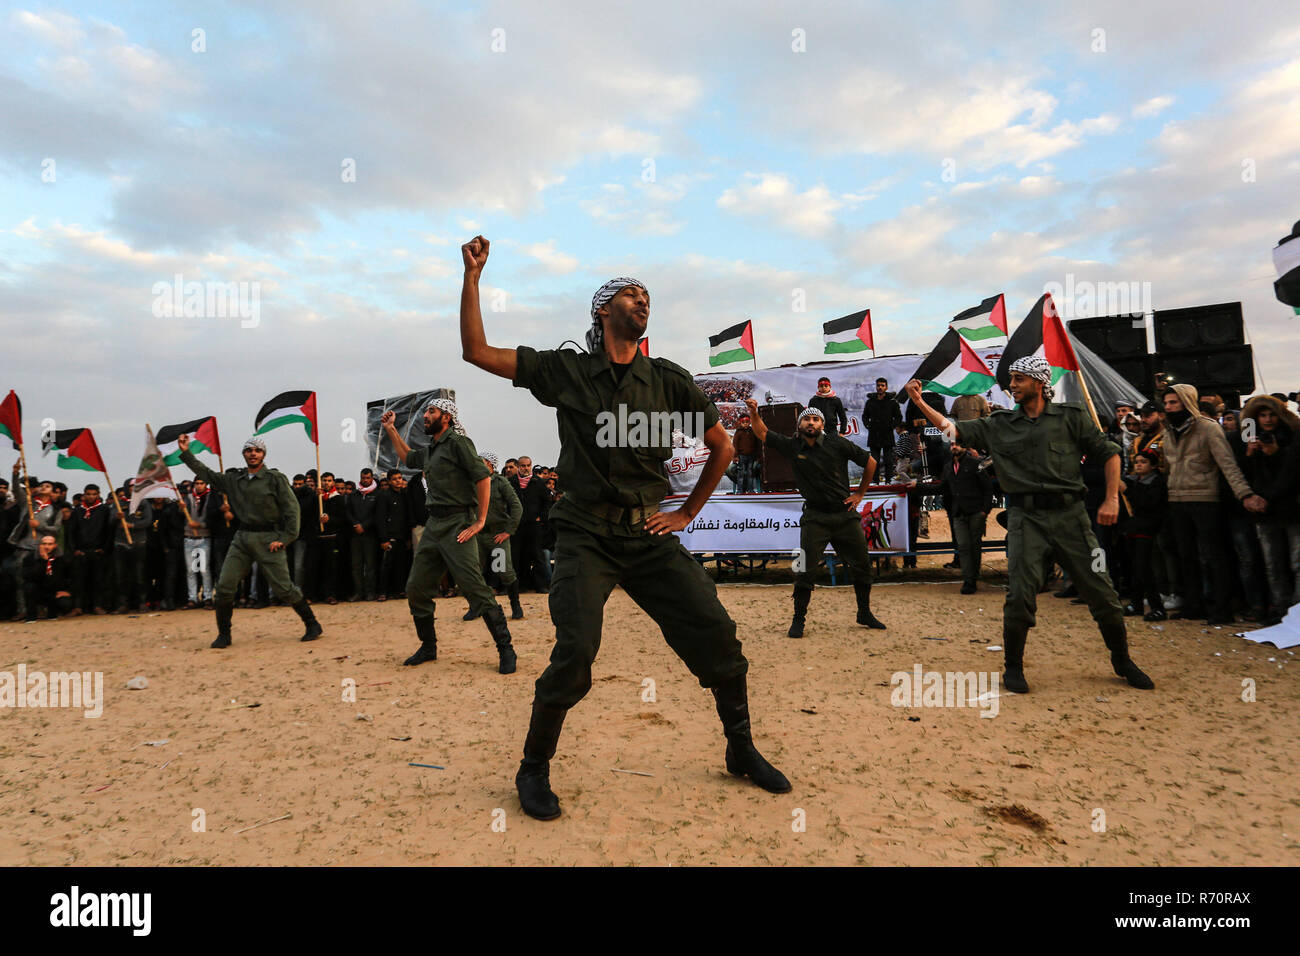 Gaza, Palestine. 7th December 2018.Palestinian protesters gather during clashes with Israeli troops in tents protest where Palestinians demand the right to return to their homeland at the Israel-Gaza border, in the east of Rafah in the southern Gaza Strip, on December 7, 2018. Credit: Awakening Photo Agency/Alamy Live News Stock Photo